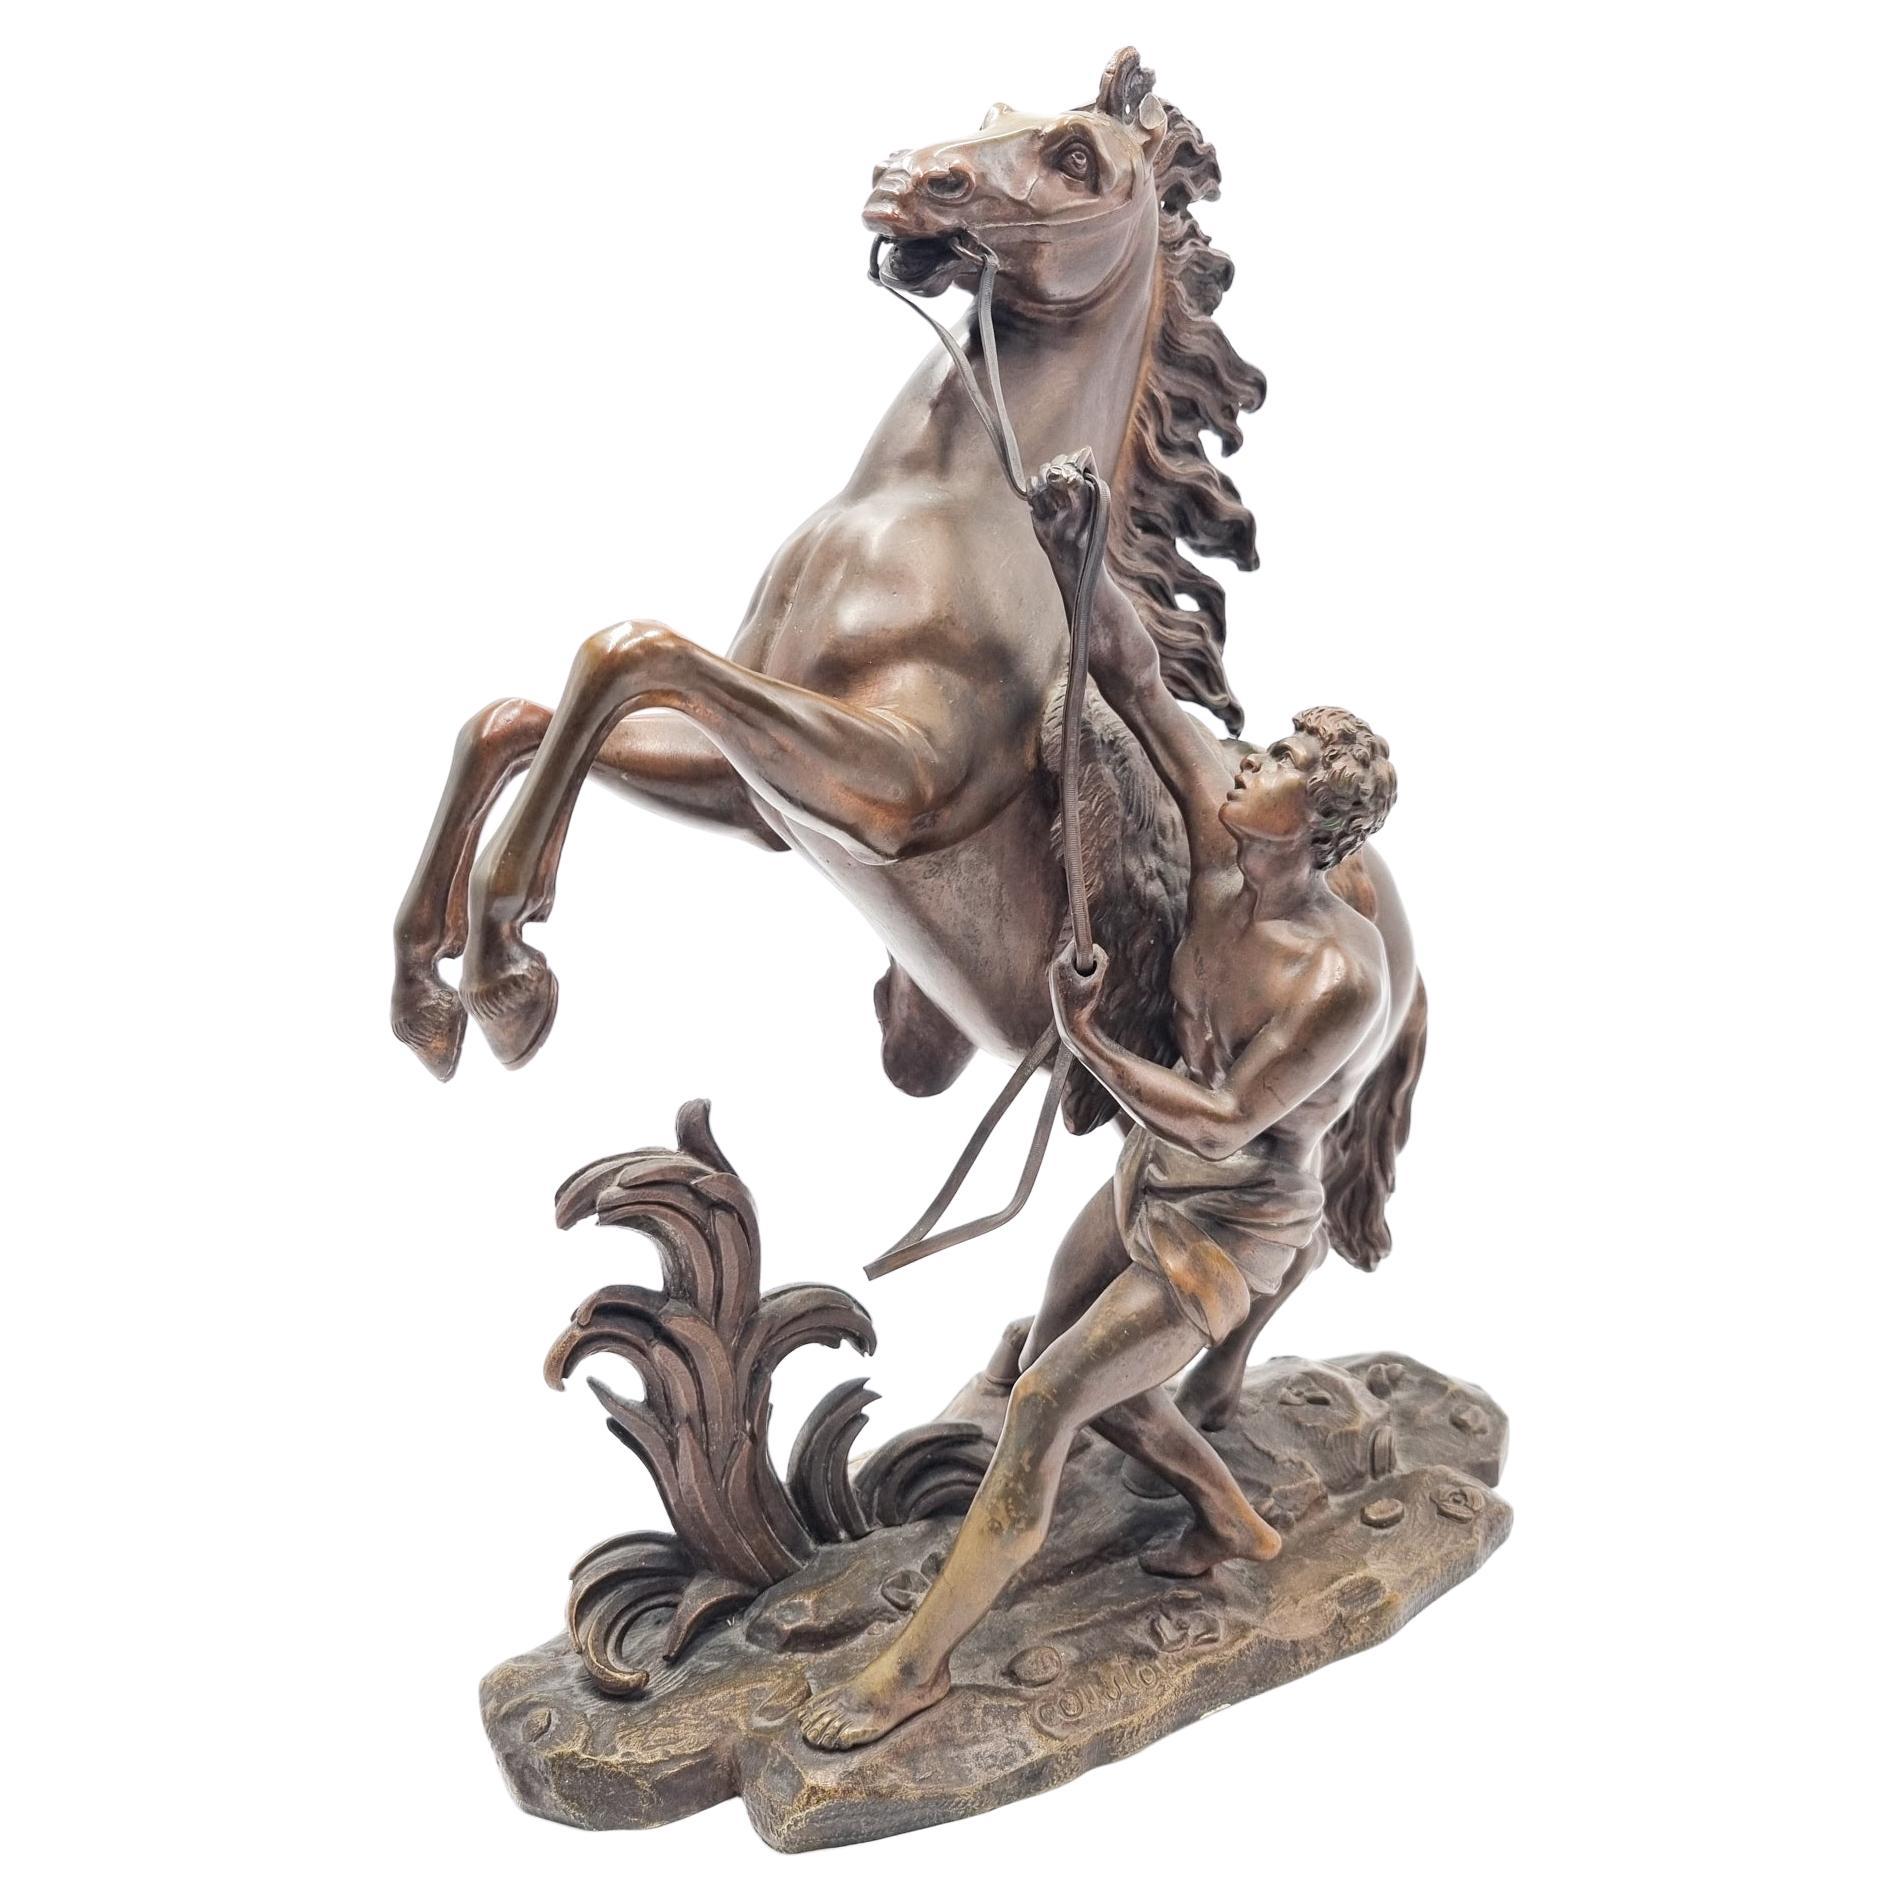 Bronze Sculpture of Horse with Rider "Chela de Marly" by Guillaume Coustou 1920s